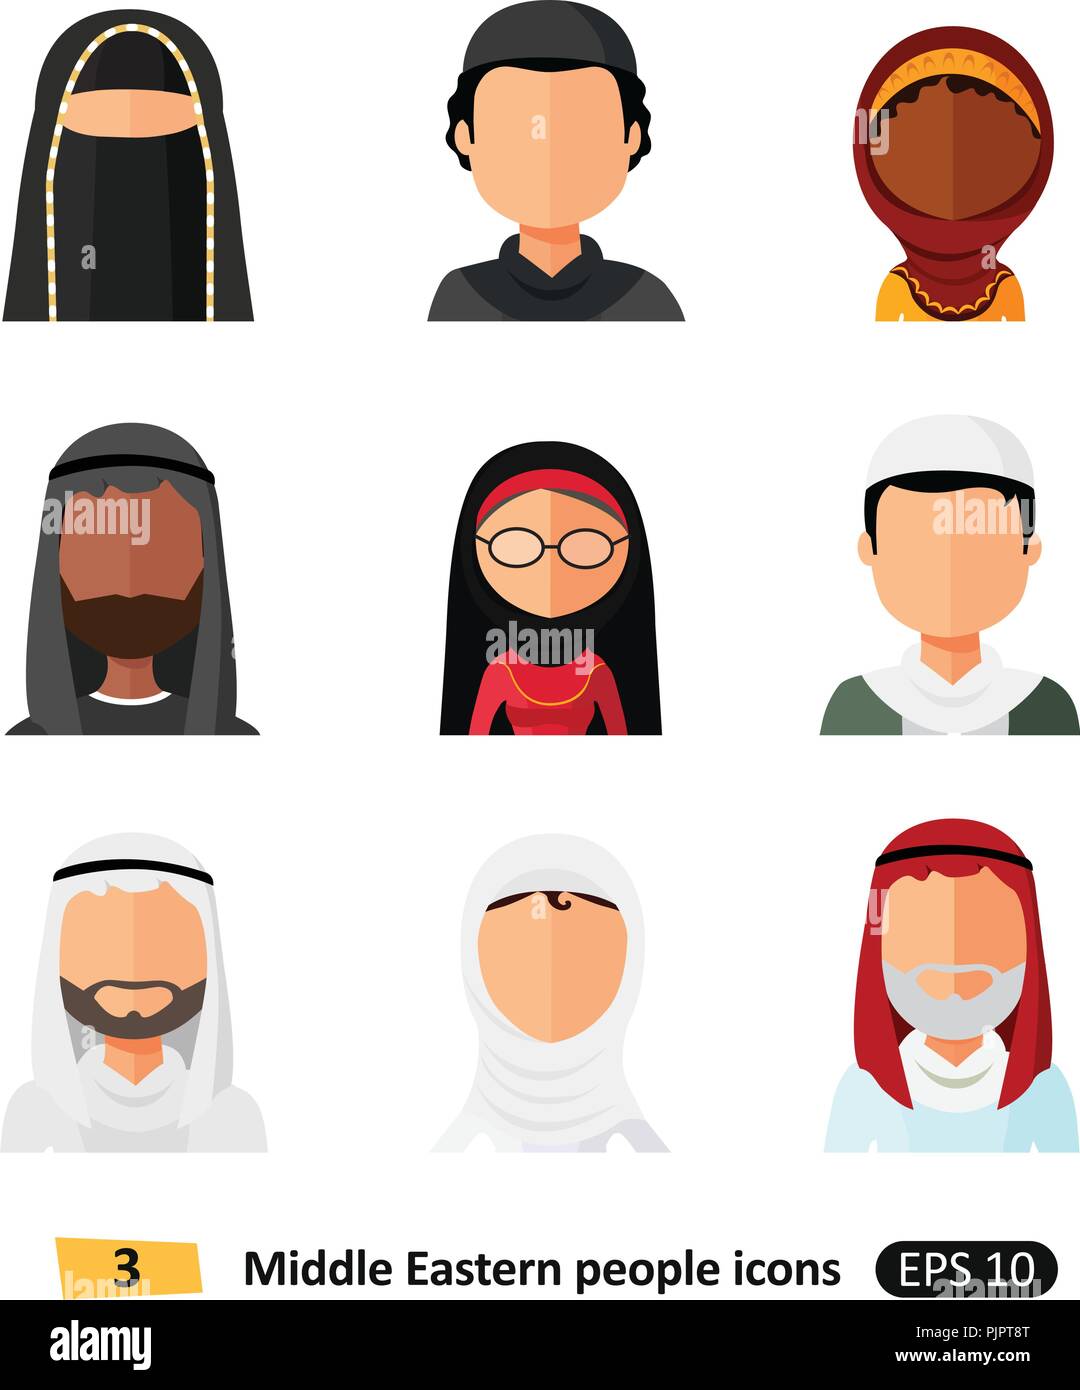 Muslim arab people avatars icons set in flat style isolated on white different arabic ethnic man and woman users faces in traditional clothing Stock Vector